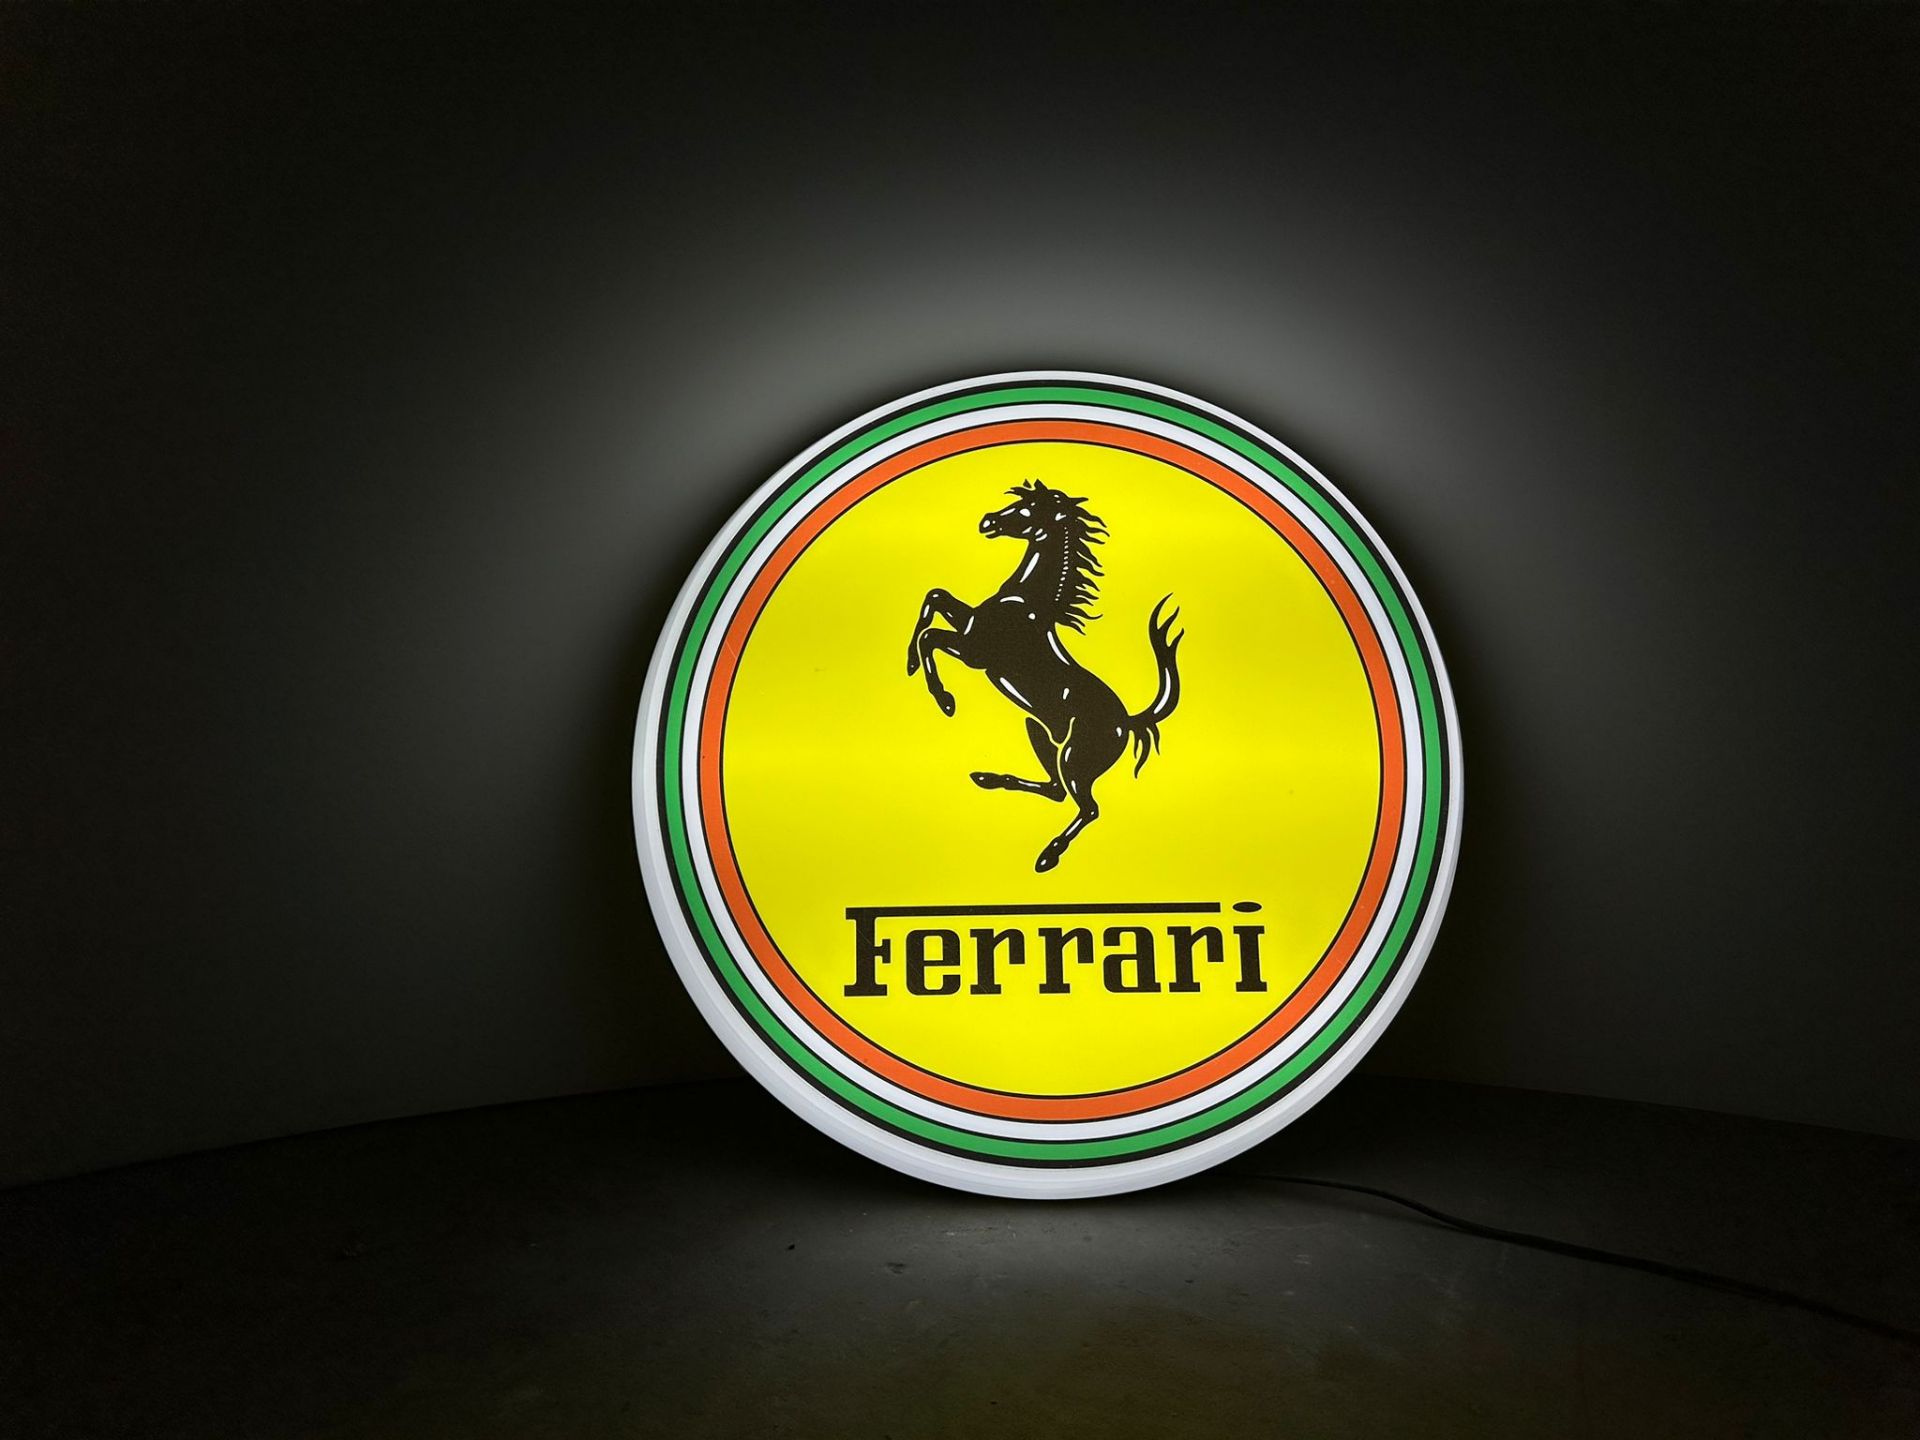 Ferrari fully working illuminated adapted to any country - Image 4 of 6